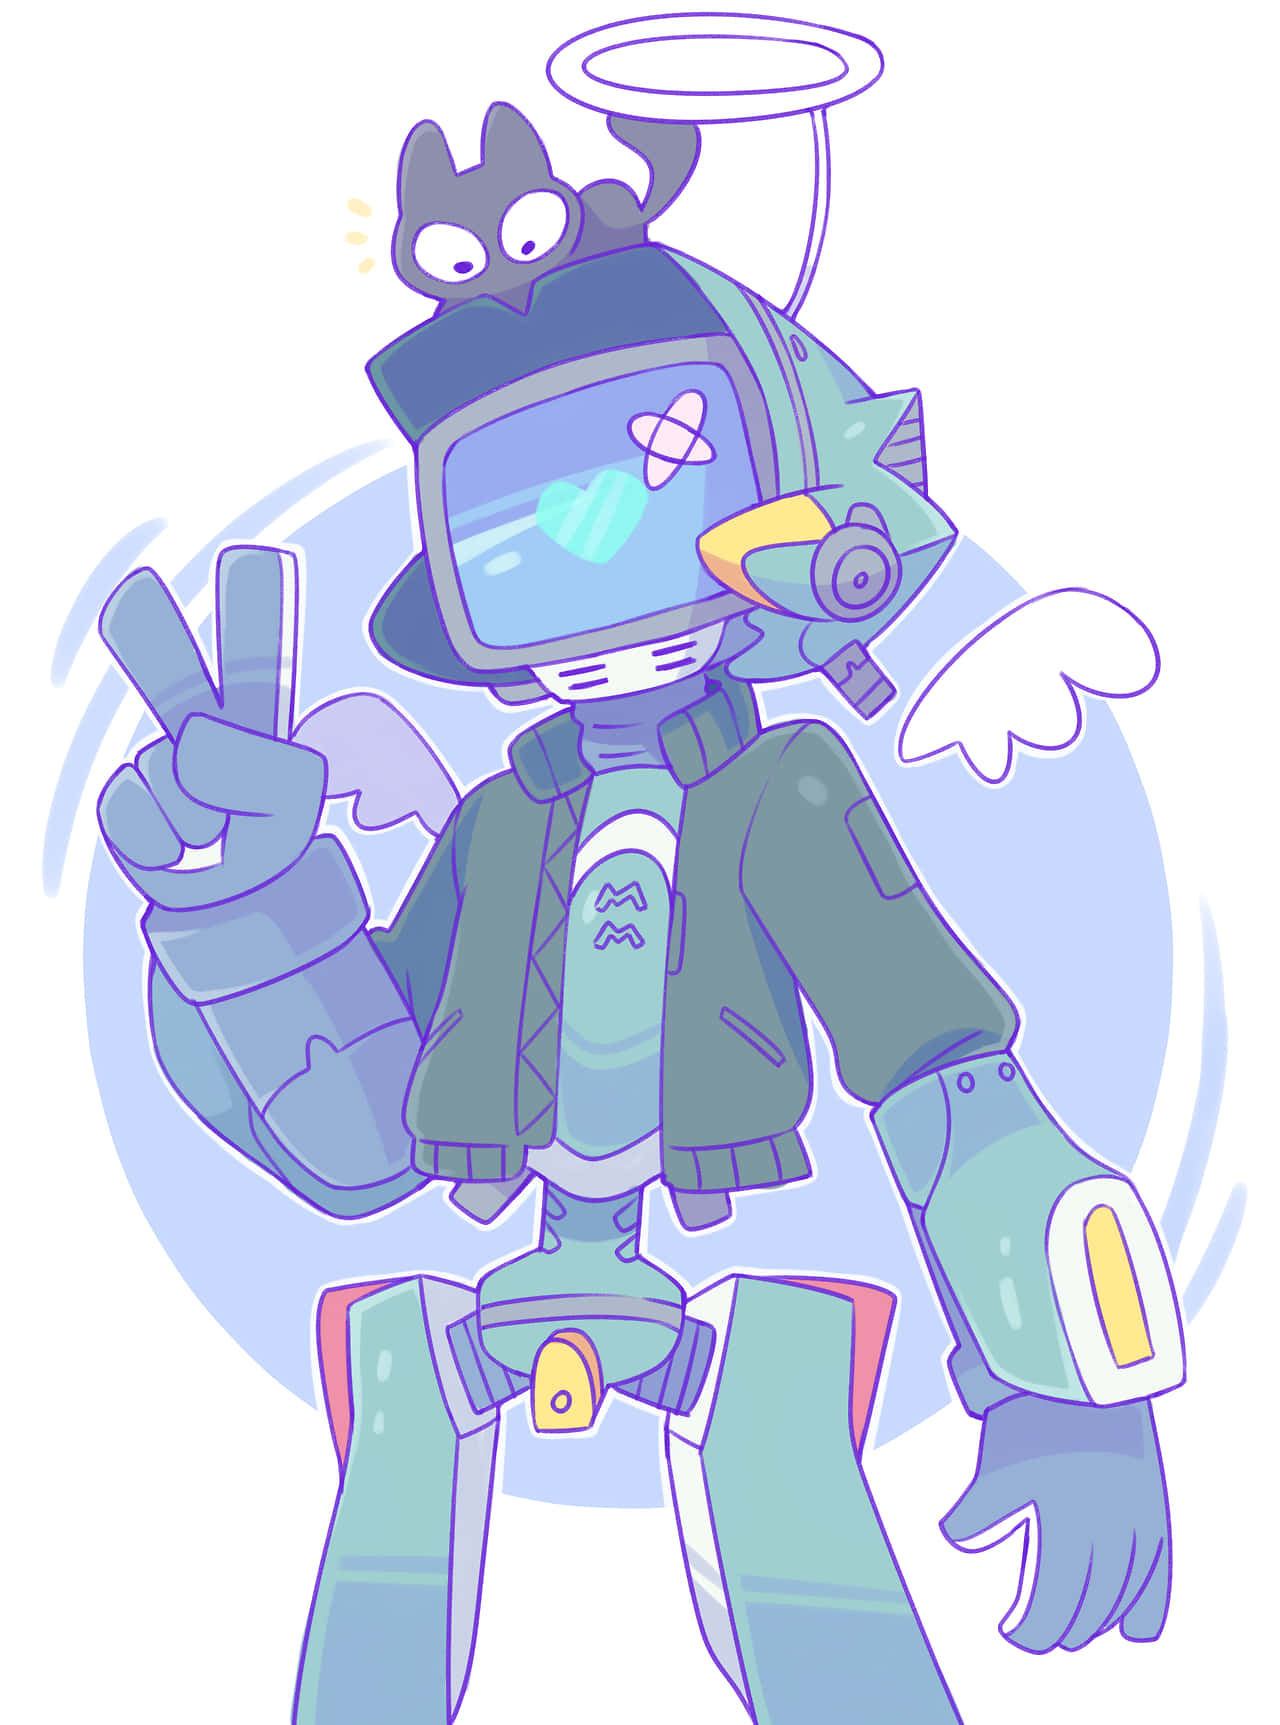 Robotic Character Canti of FLCL Standing Against a Blue Patterned Background Wallpaper